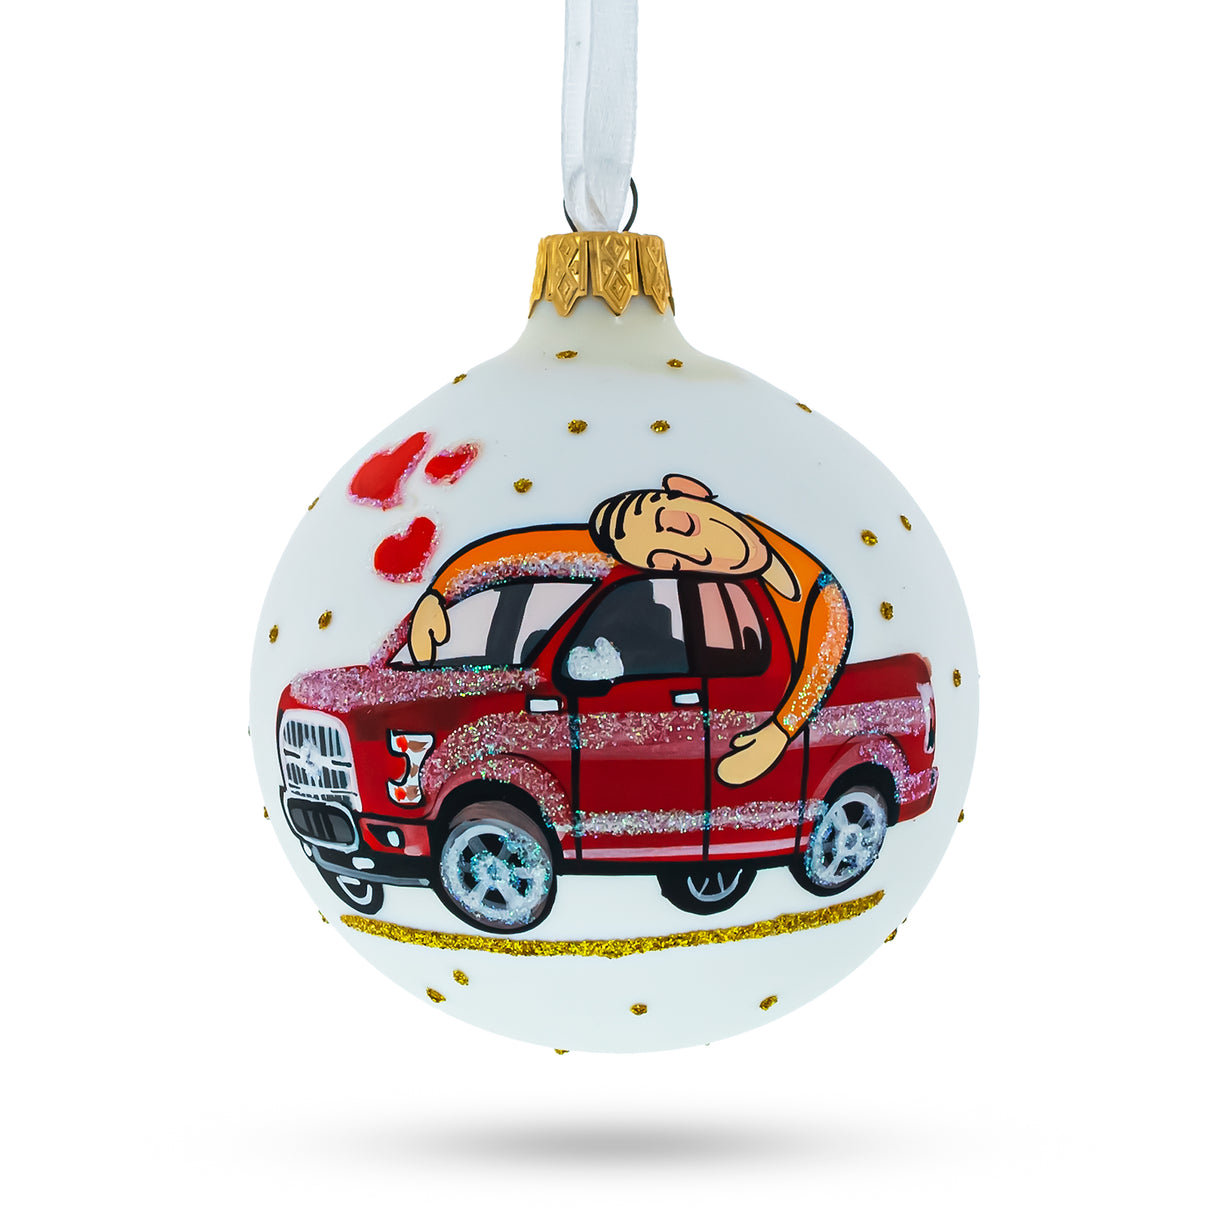 I Love My Car Blown Glass Ball Christmas Ornament 3.25 Inches in White color, Round shape